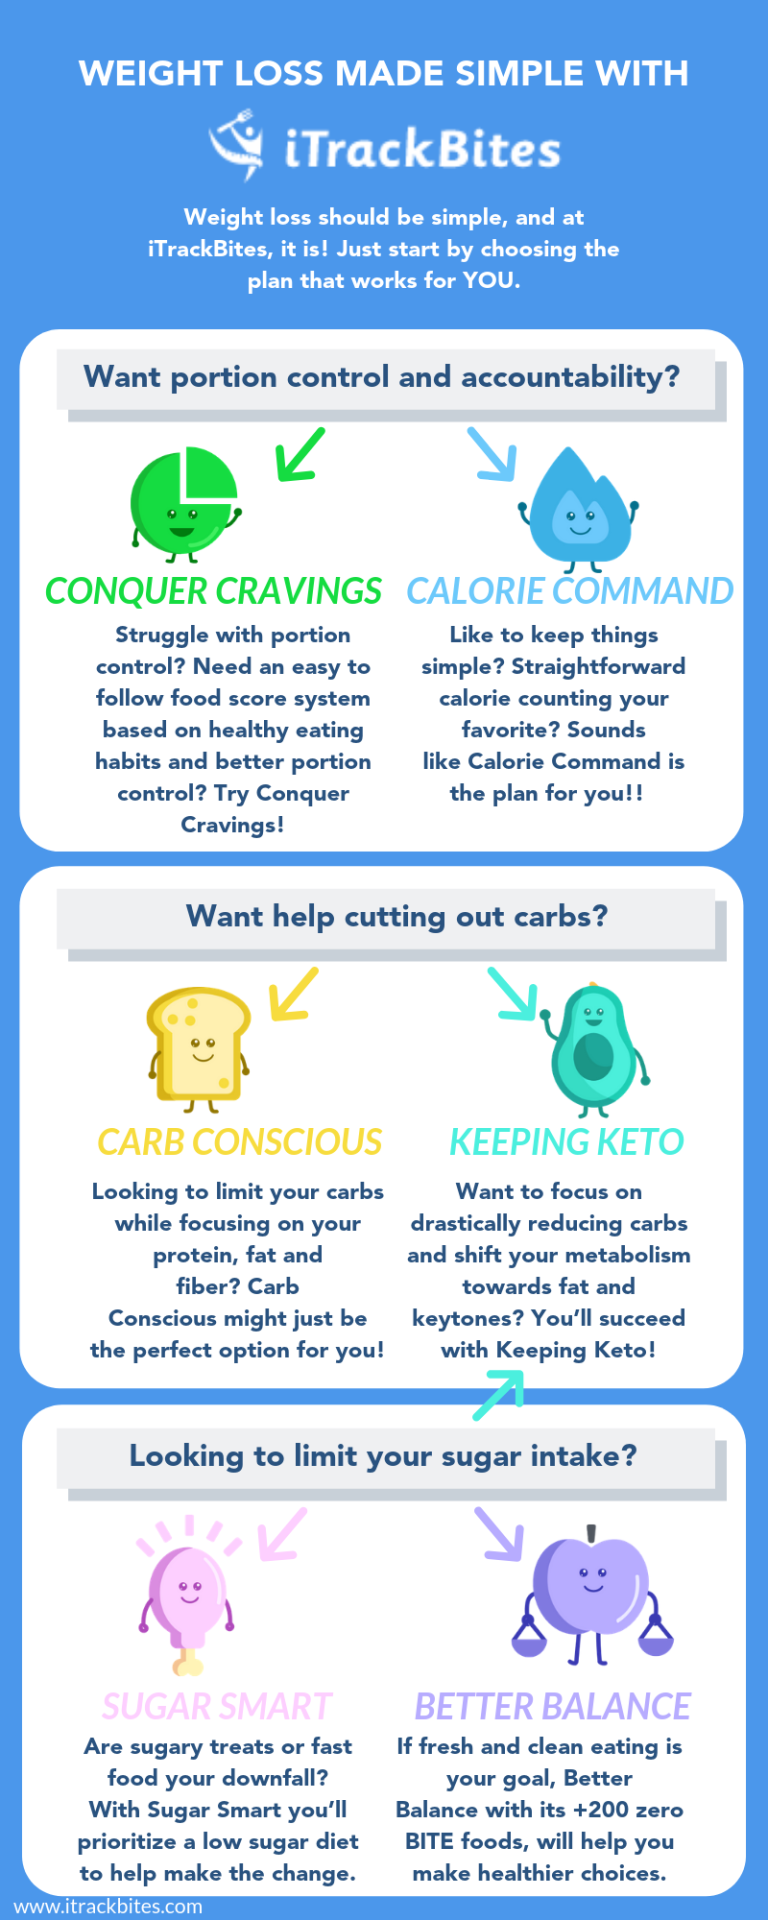 Trying to figure out which Healthi plan works best for you? Here’s an infographic to make it easy! Whether your focus is on portion control, cutting back carbs, or reducing sugar, Healthi has a plan for you. Ready to put your plan into...